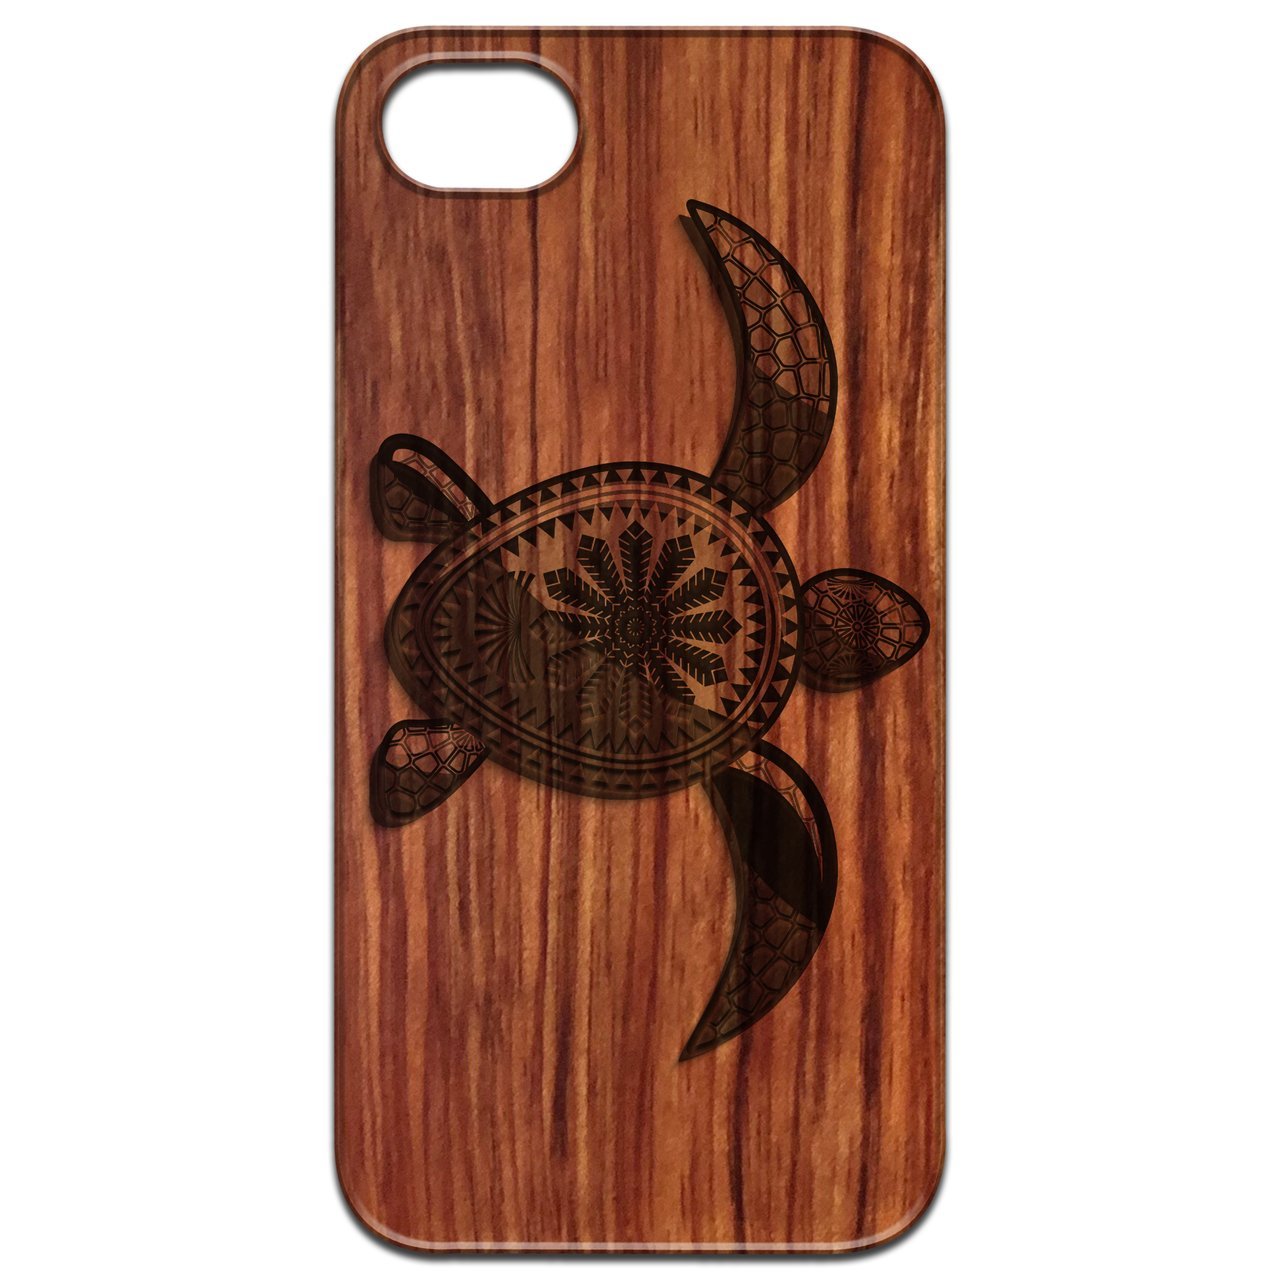 Engraved Hawaiian Turtle Wooden Cell Phone Case - Saltwater Bodega